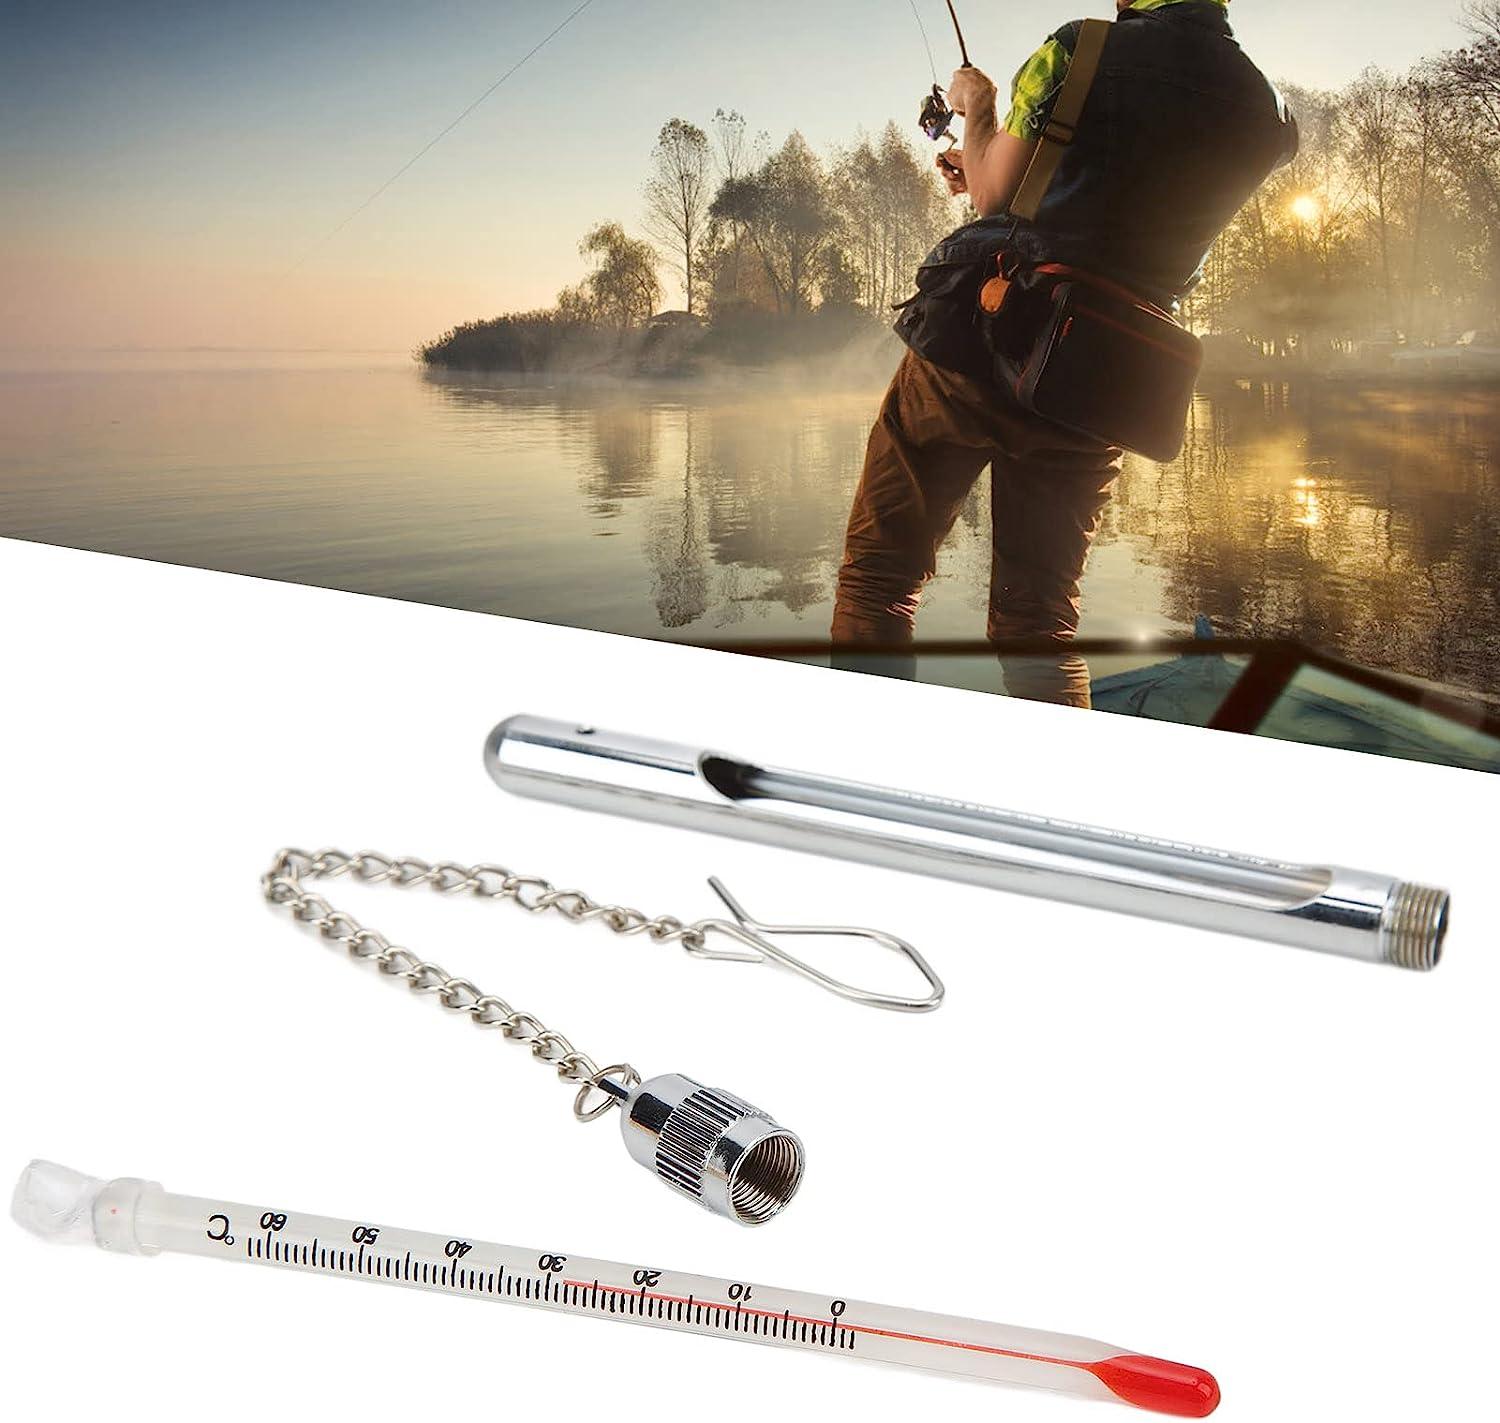 BRDI Fishing Thermometer, Practical Compact Stream Water